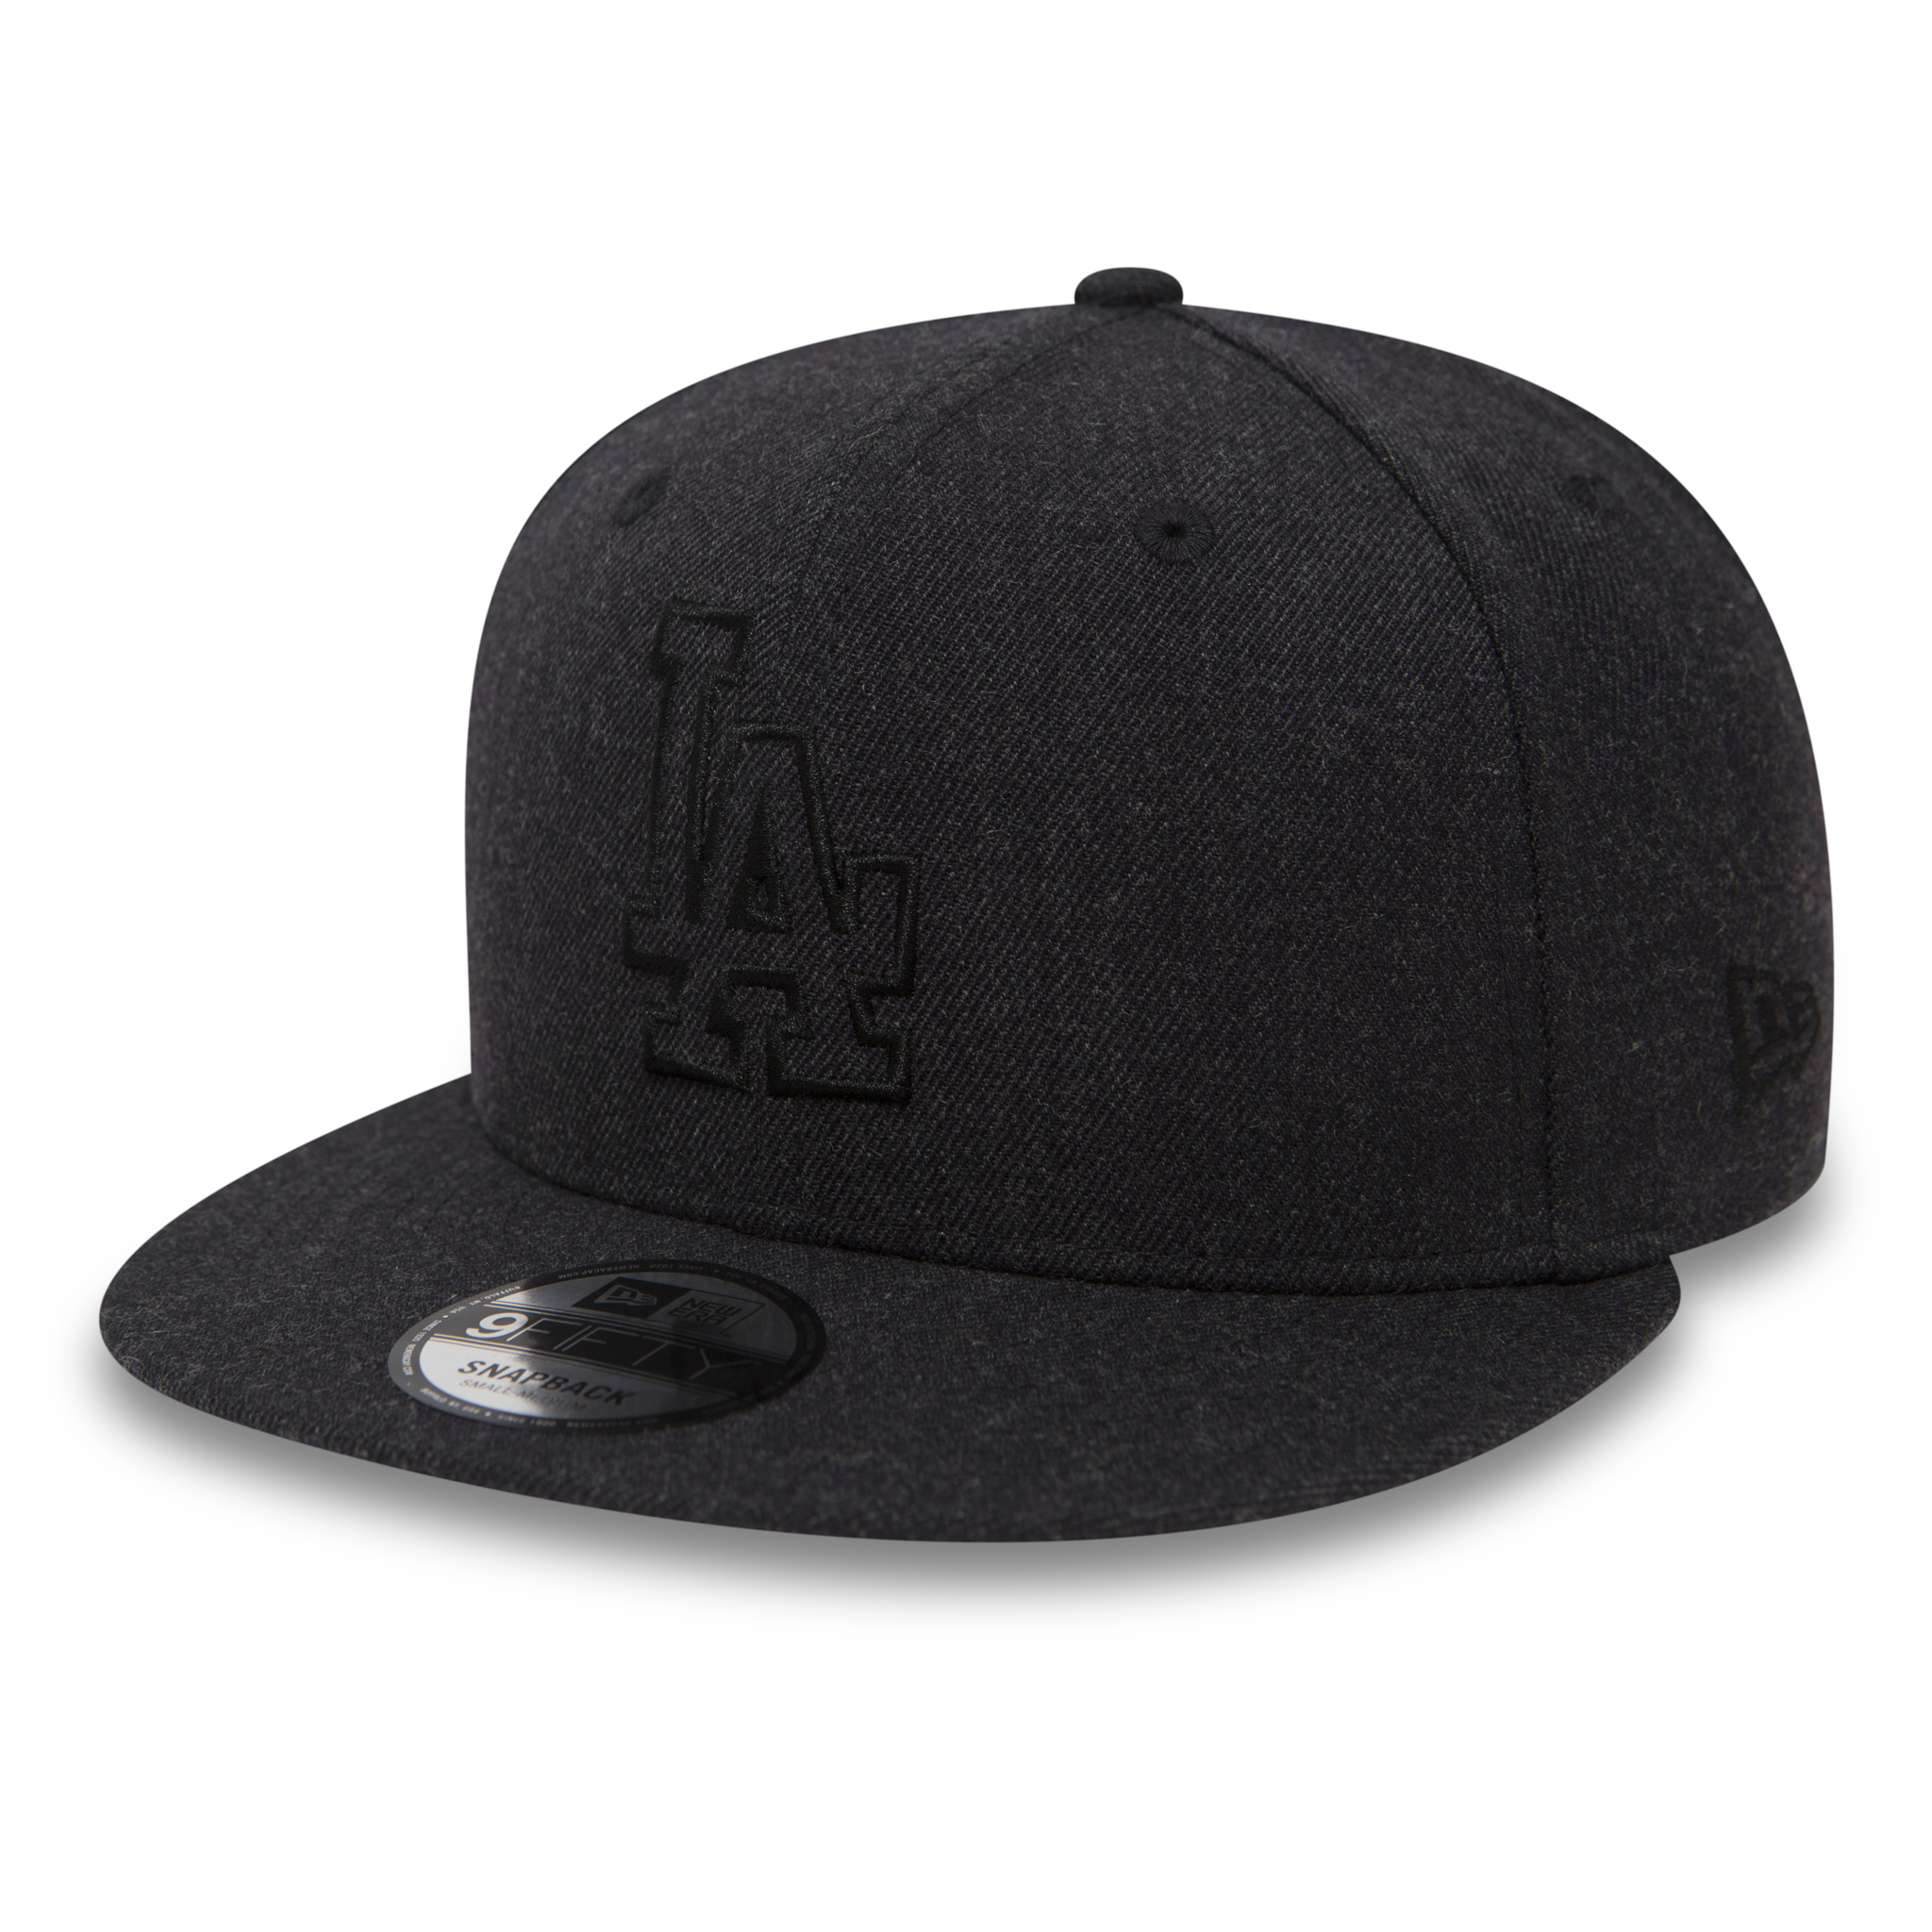 Los Angeles Dodgers Heather Essential Black 9FIFTY Cap